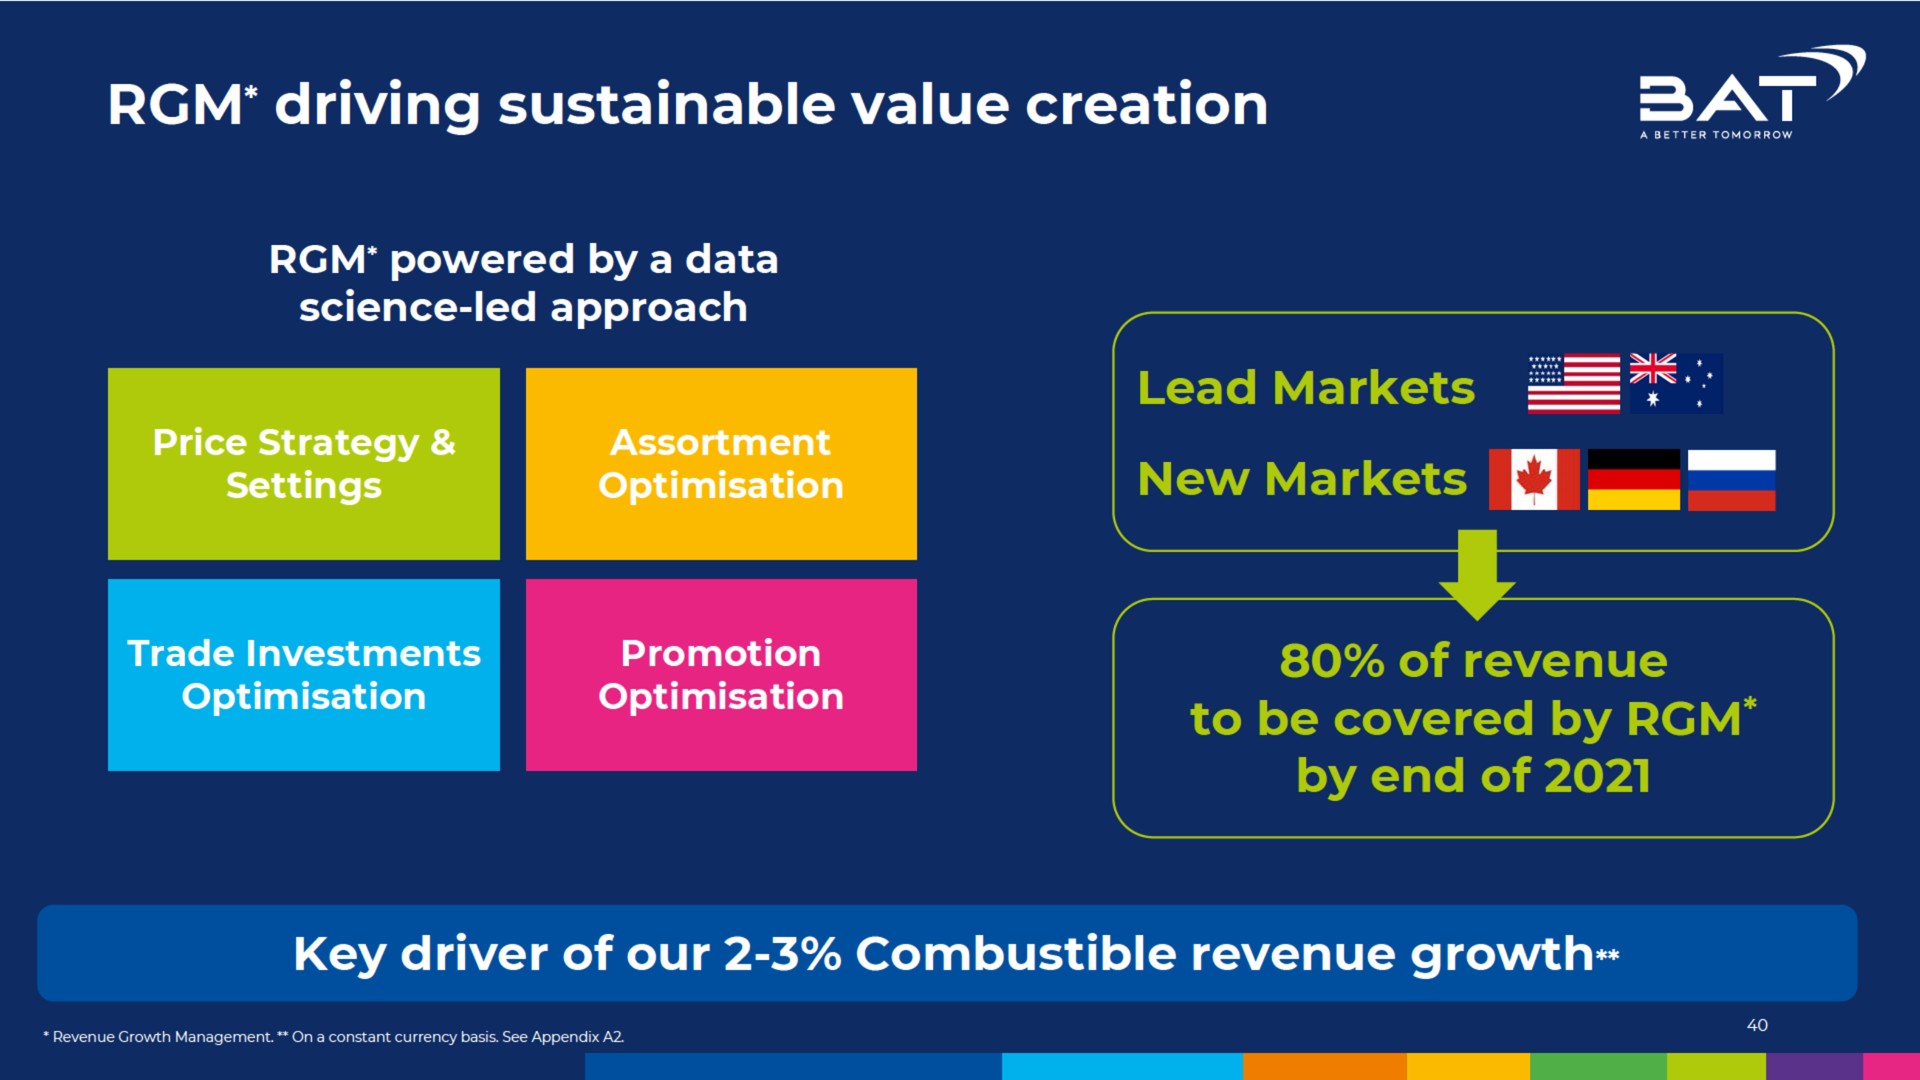 driving sustainable value creation to be covered by new markets | BAT